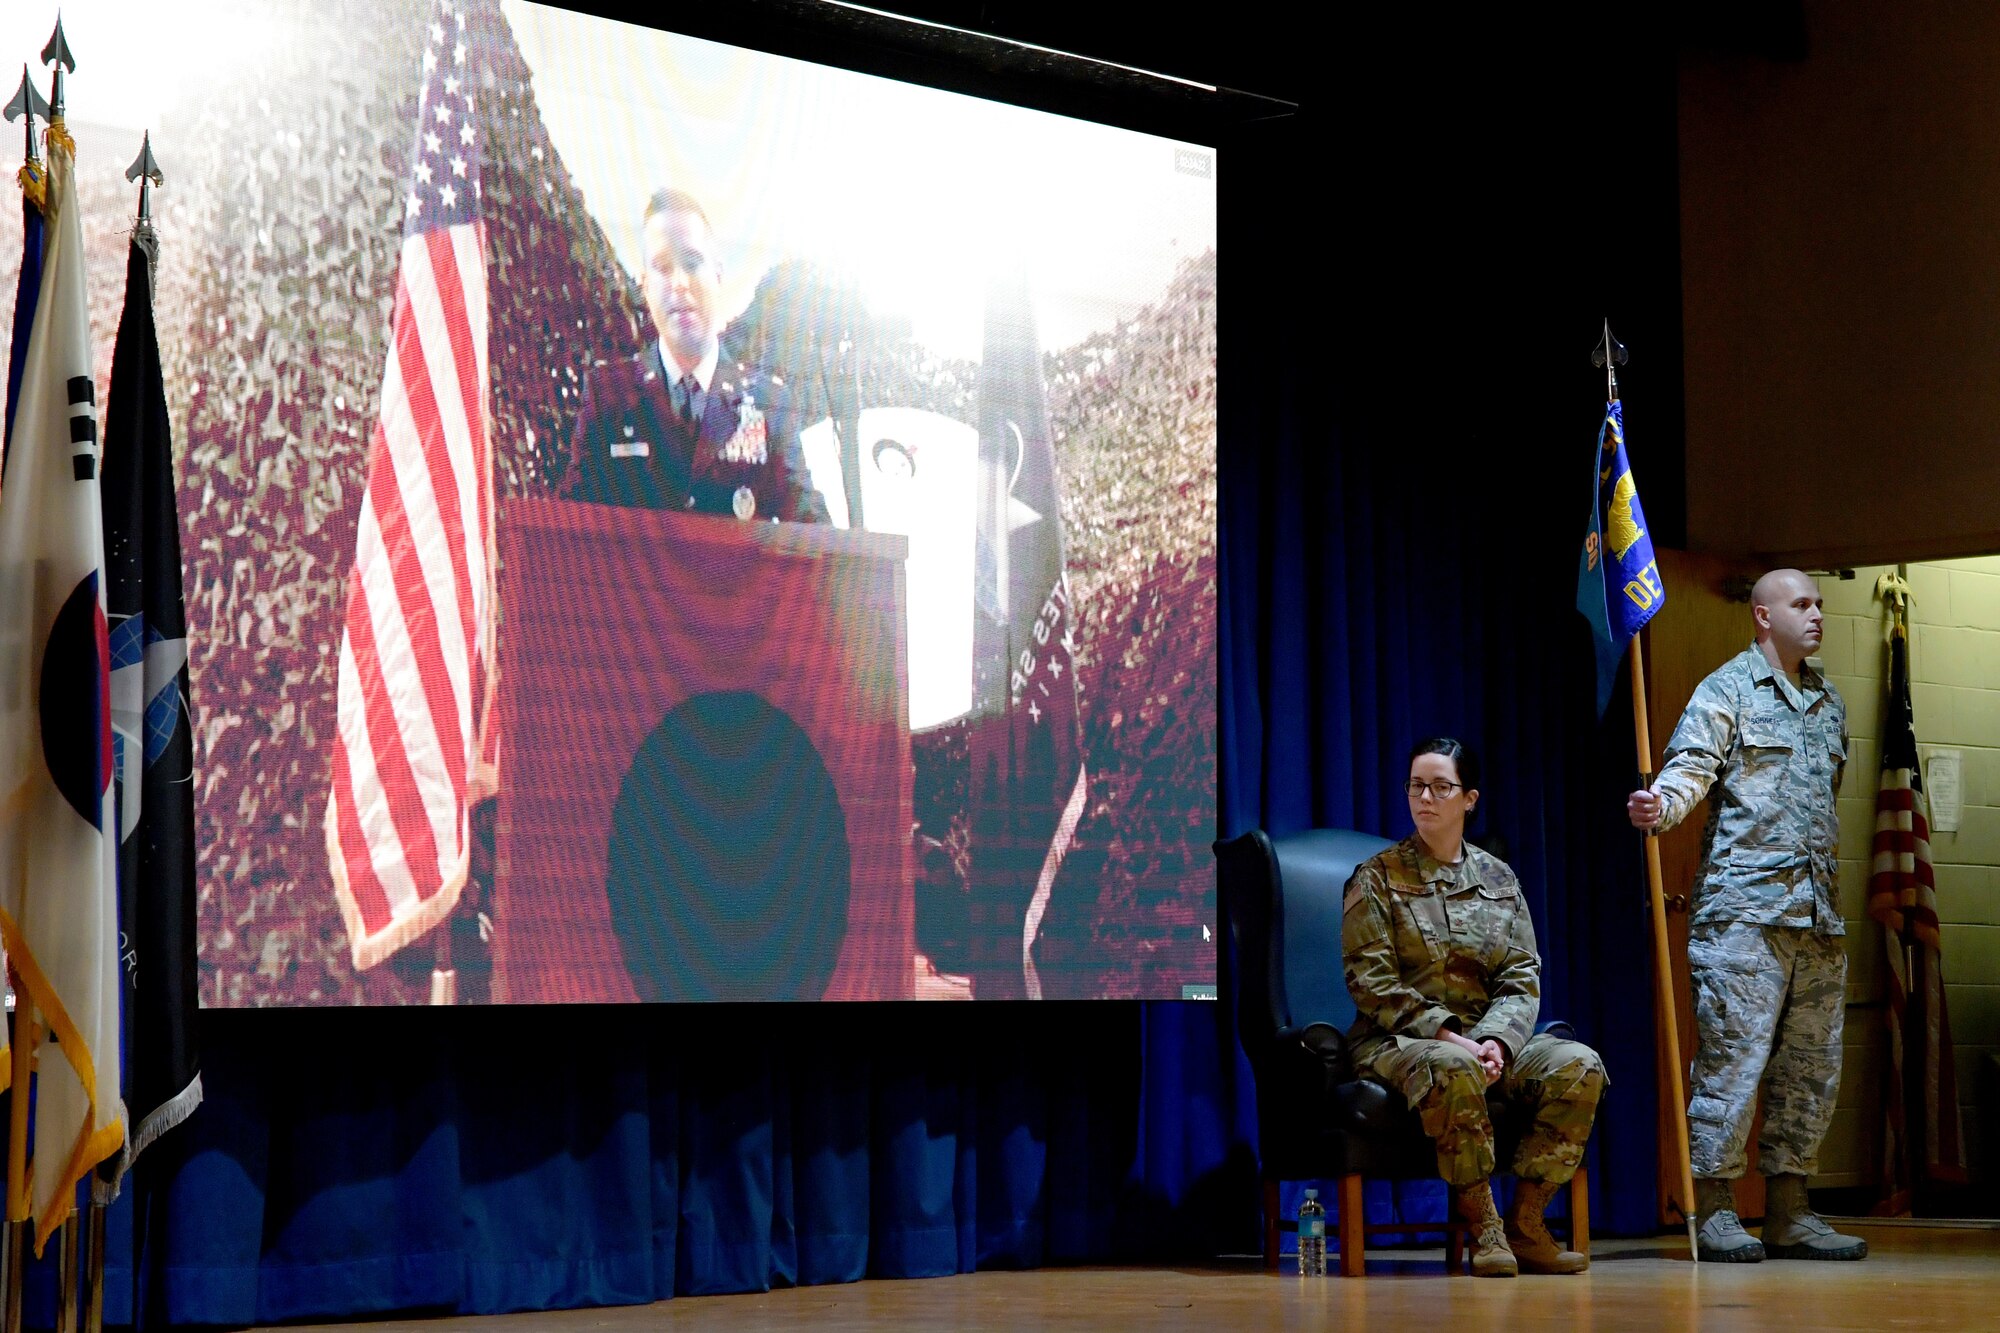 U.S. Space Force Lt. Col. Nathaniel Peace, 73rd Intelligence, Surveillance and Reconnaissance Squadron commander, speaks during a transition ceremony at Osan Air Base, Republic of Korea, Nov. 5, 2020. Formerly known as Detachment 2 of the 18th IS, newly formed as Detachment 2 of the 73rd ISRS U.S. Space Force serves under Colorado’s Space Delta 7 Peterson Garrison. (U.S. Air Force photo by Senior Airman Noah Sudolcan)